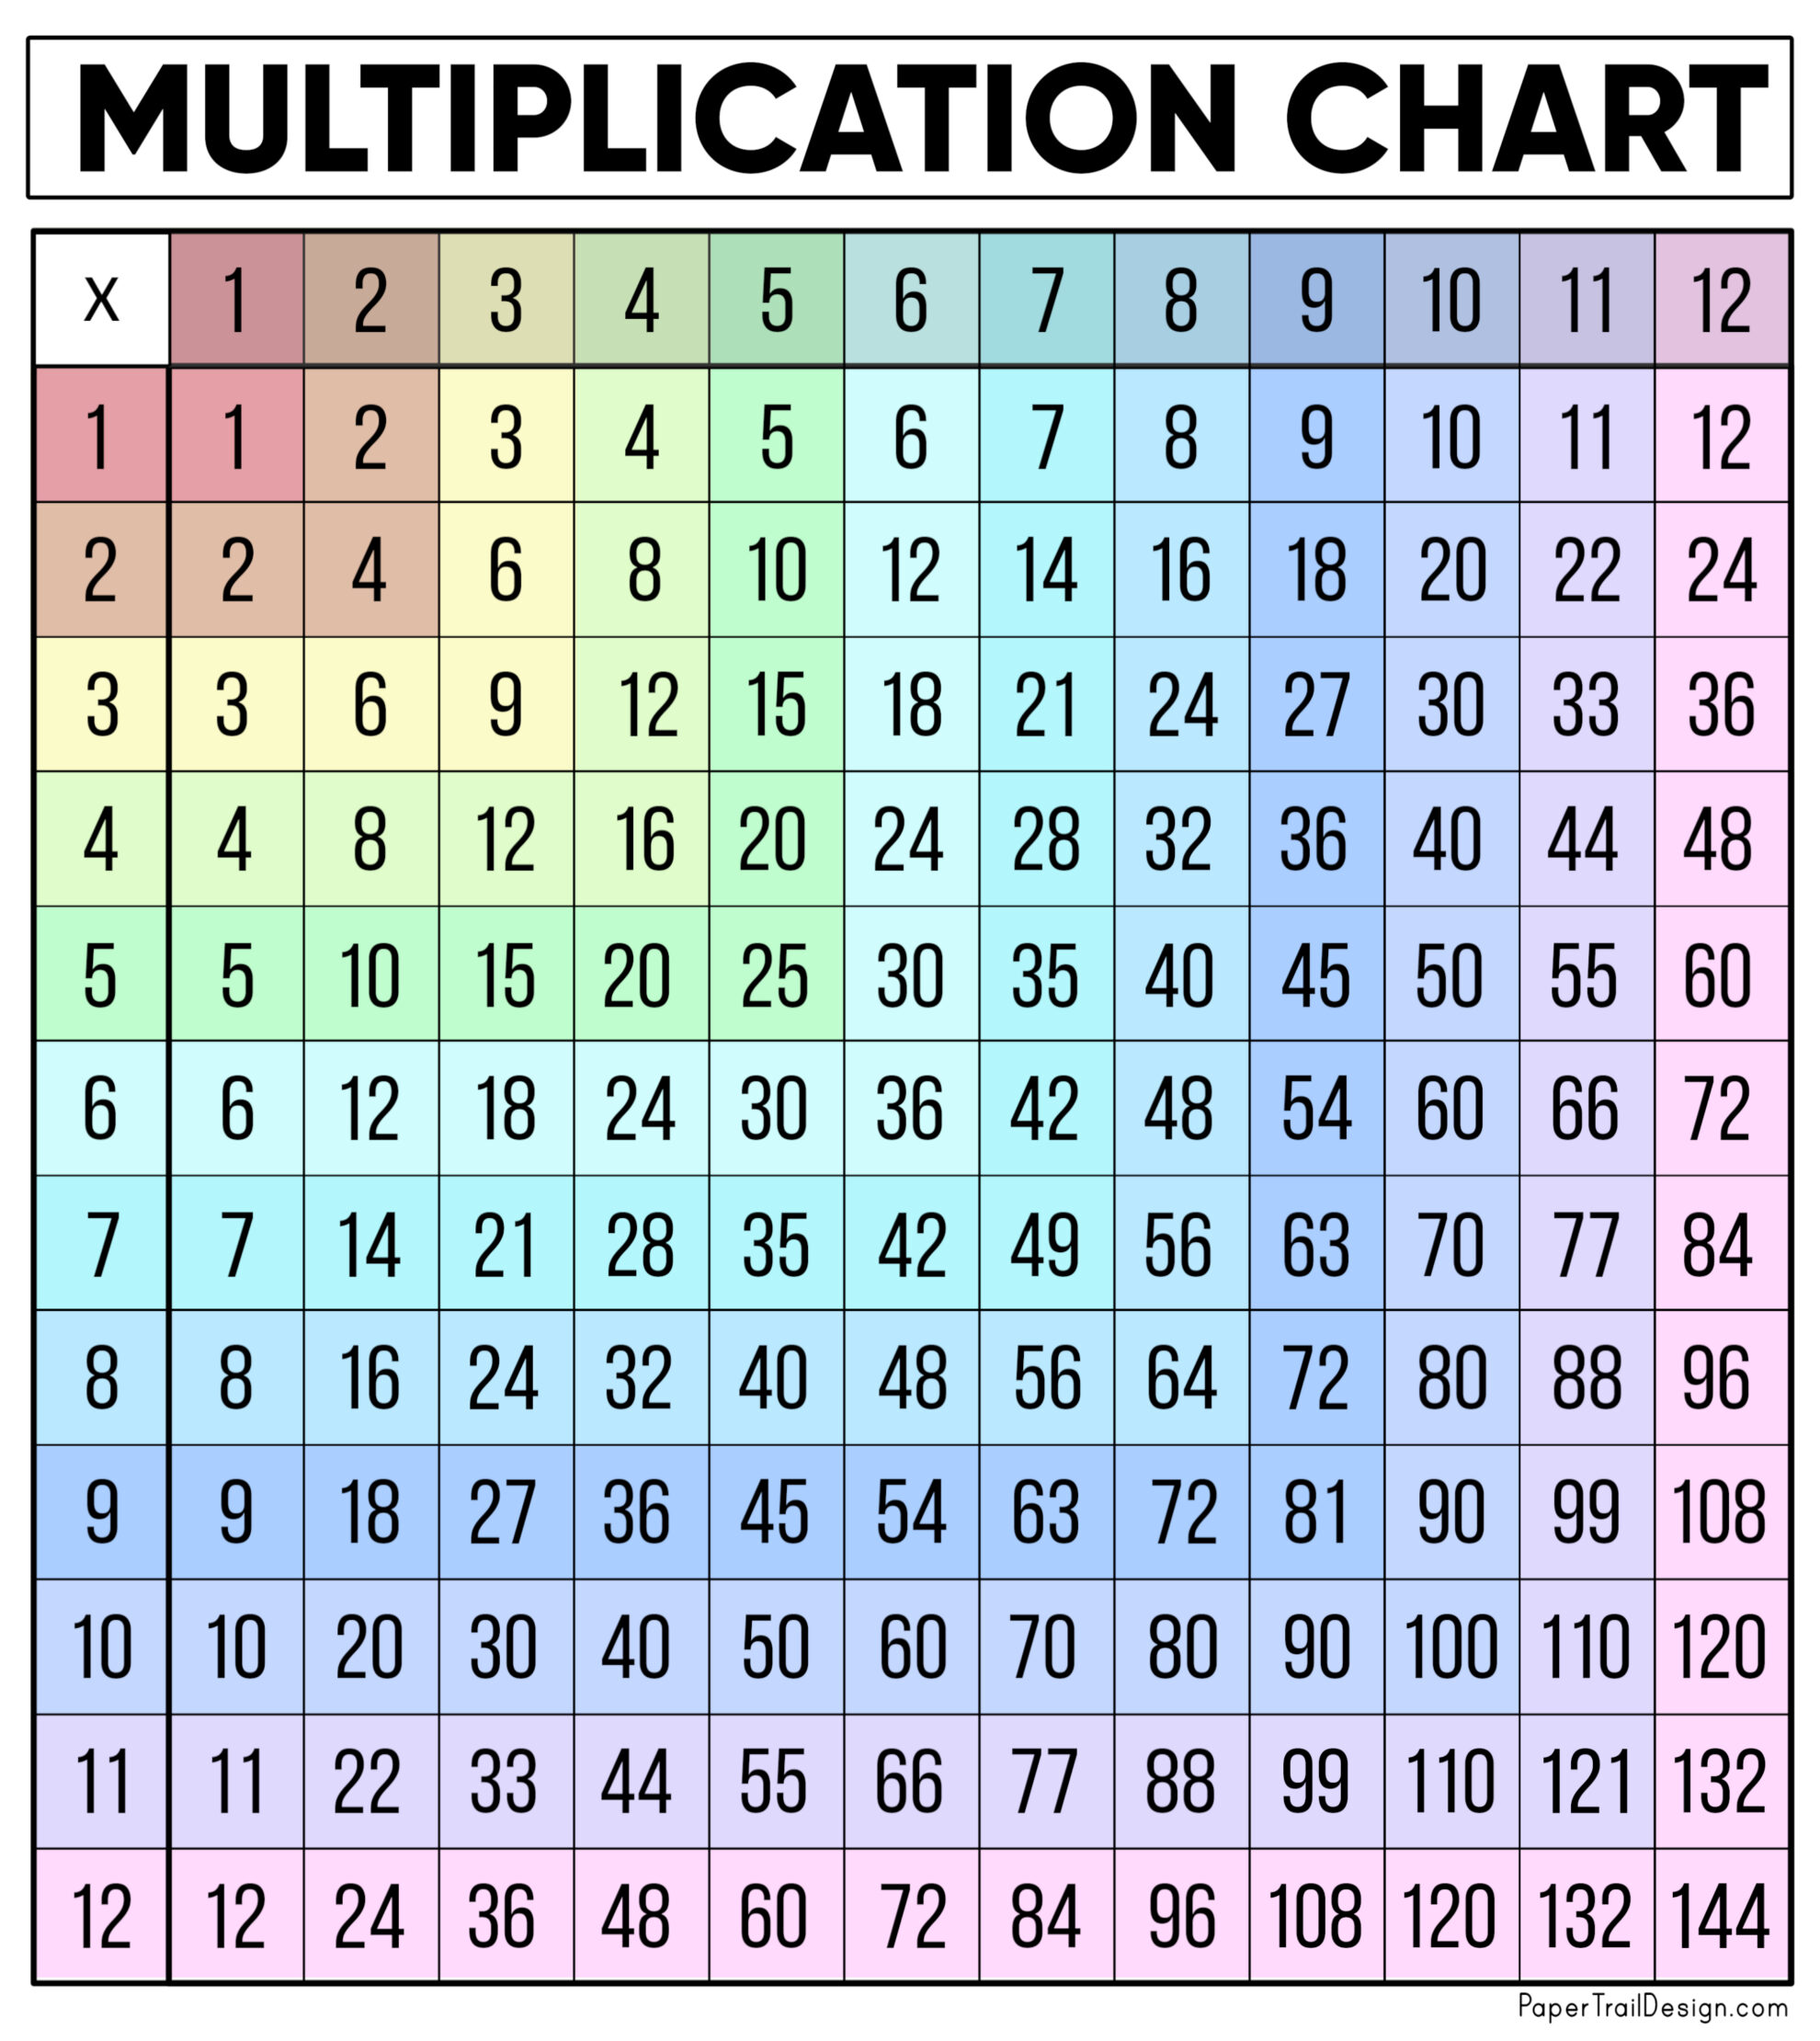 times table chart 1 to 15